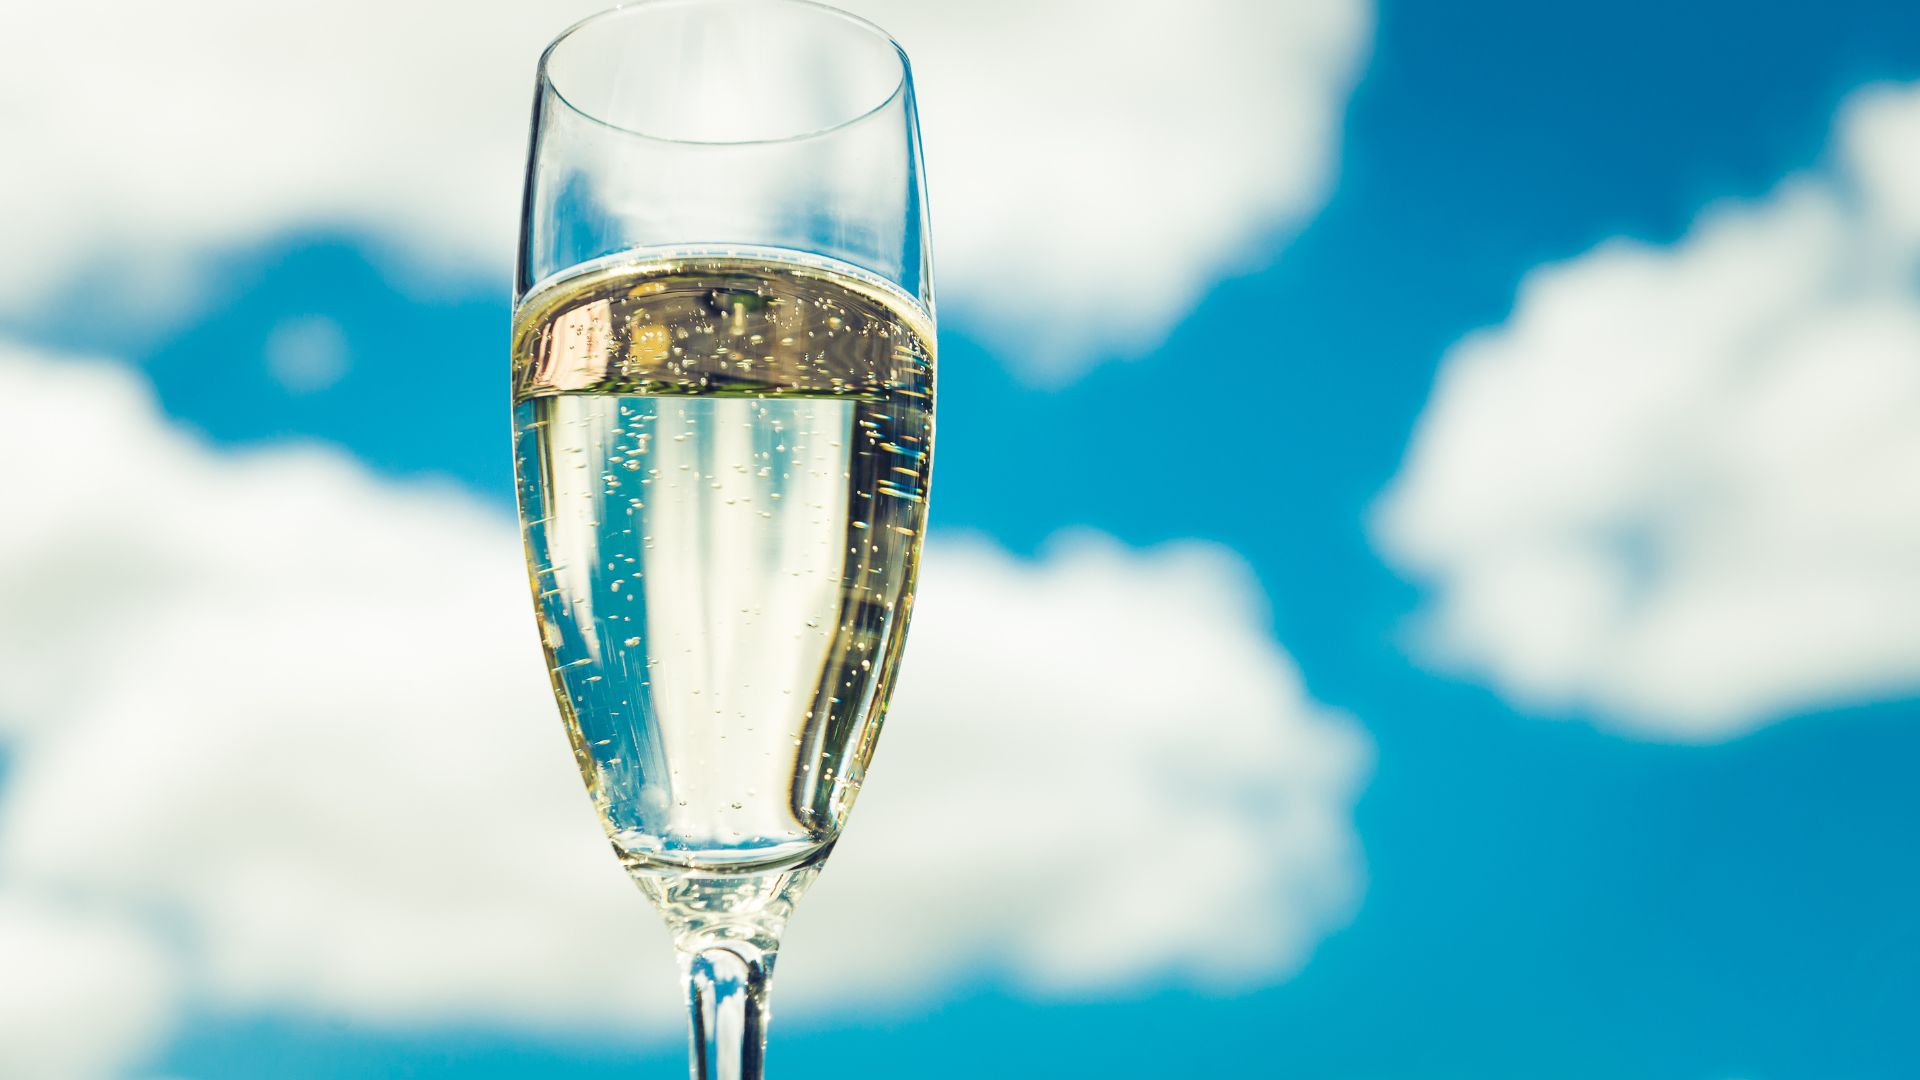 a glass of prosecco against a blue sky